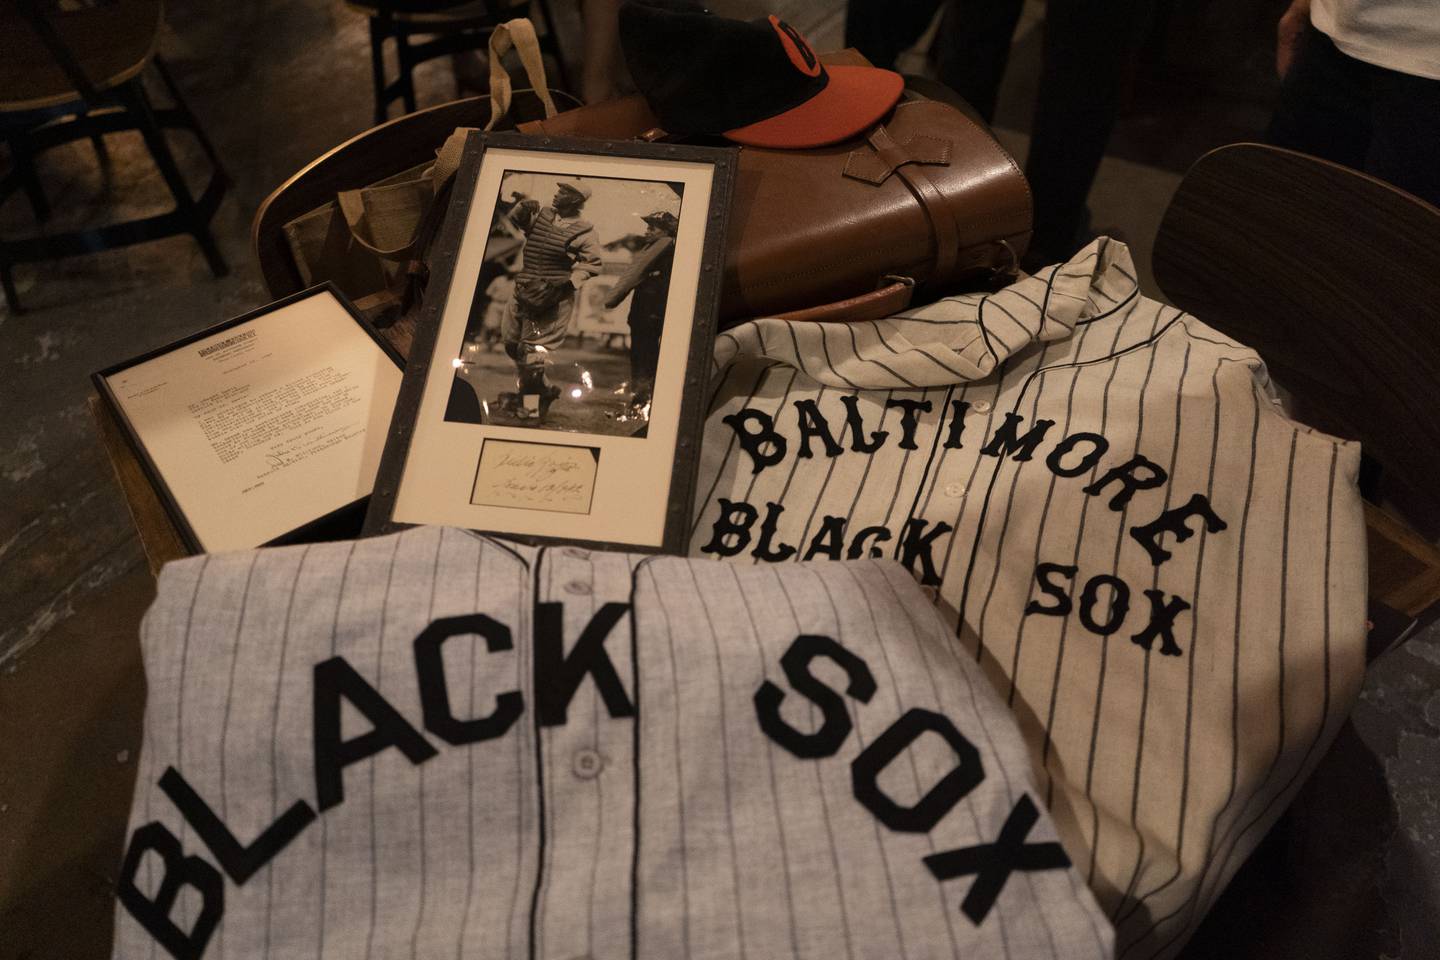 Baltimore Black Sox artifacts like photos, signatures and jersey replicas. Bernard McKenna brought the replicas to Peabody Heights Brewery on August 18, 2022.